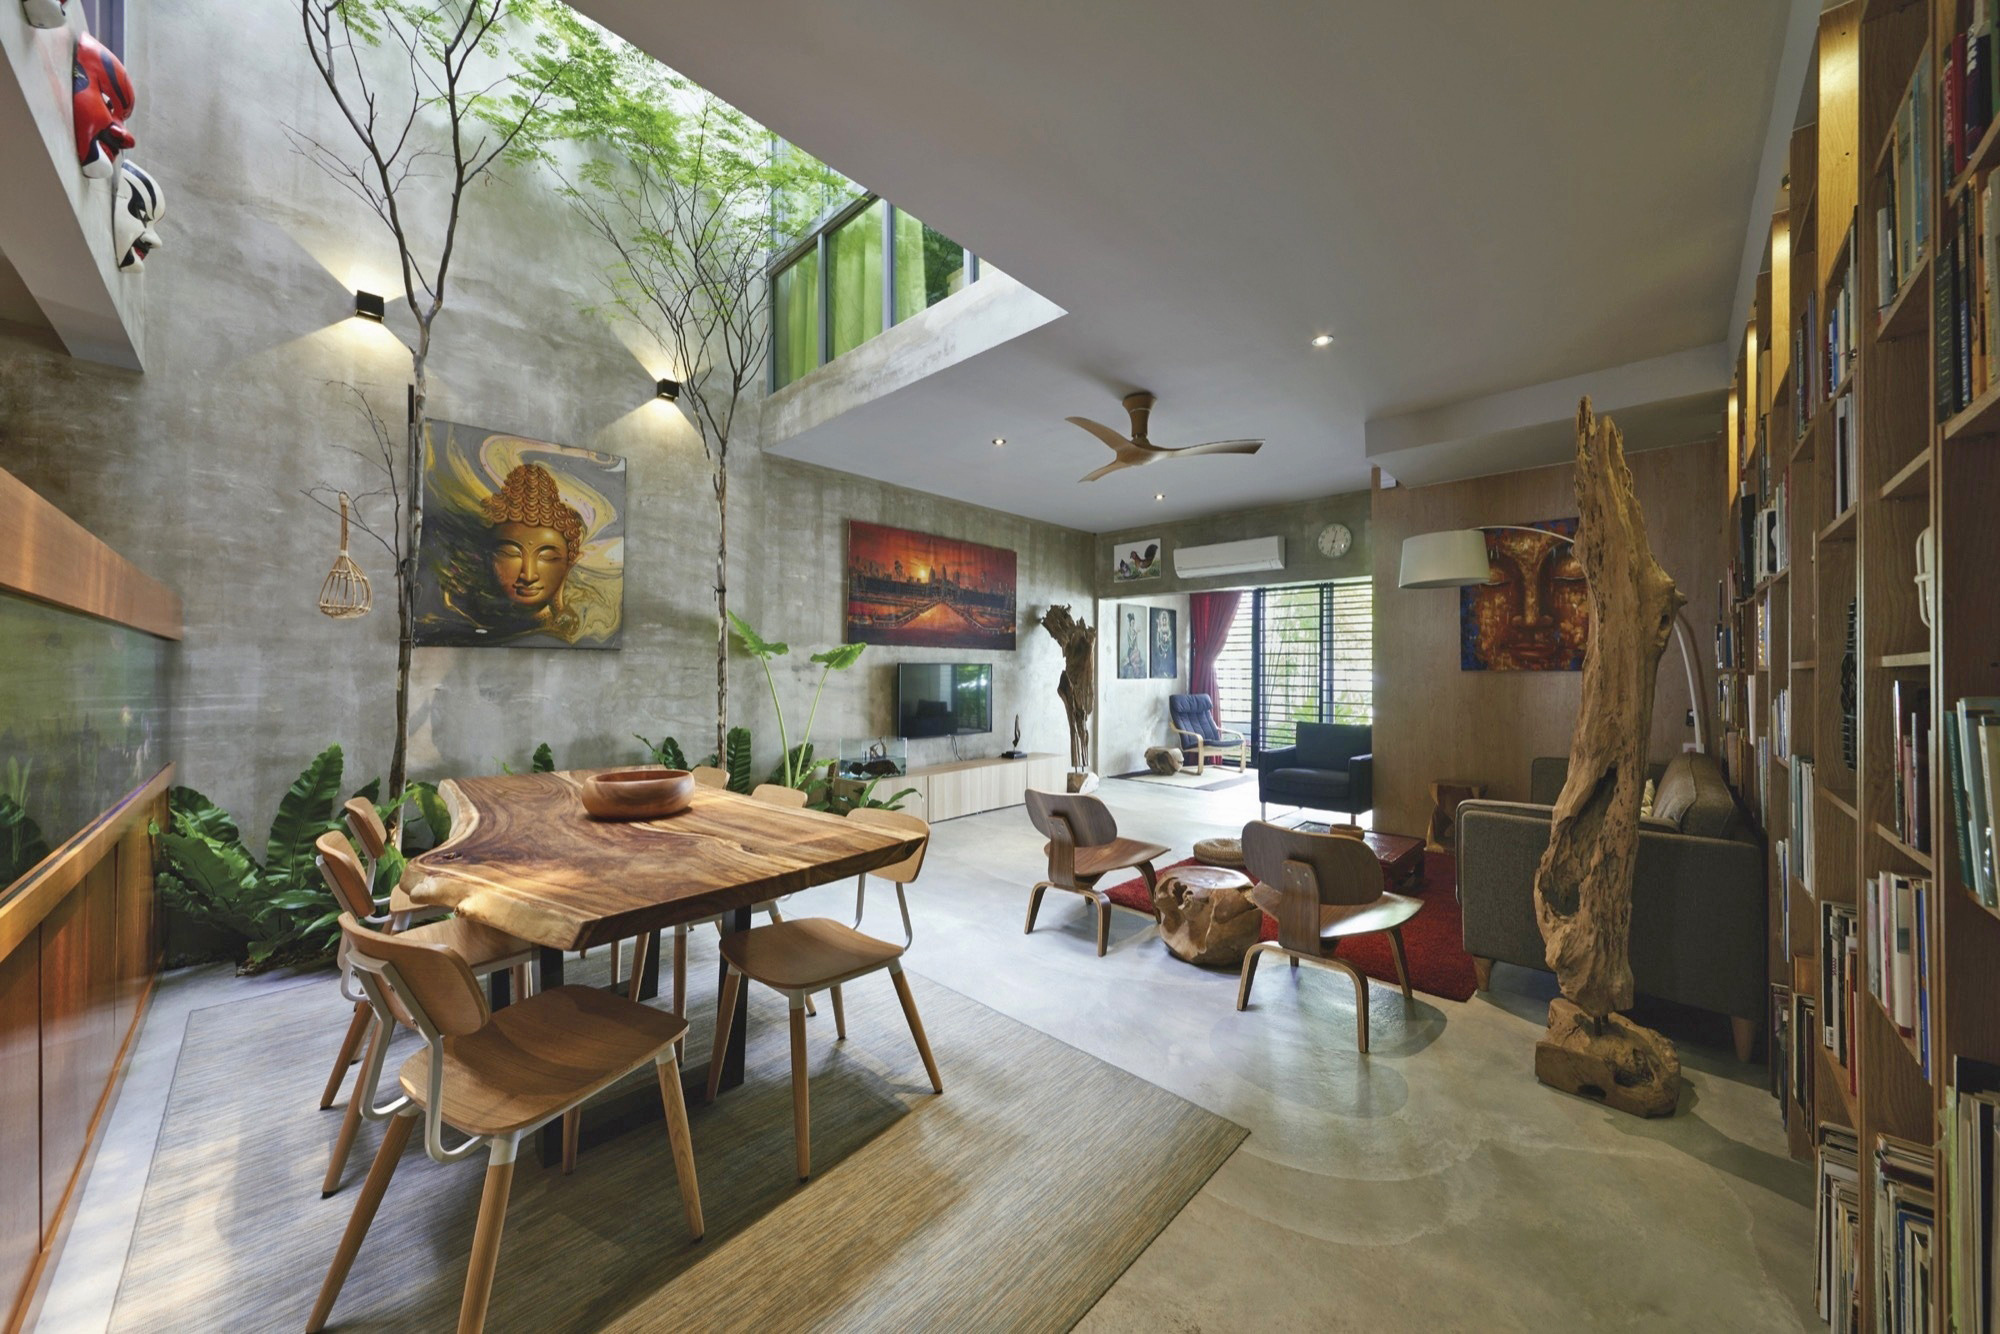 Trees and Shrubs create Faux Courtyard Inside House